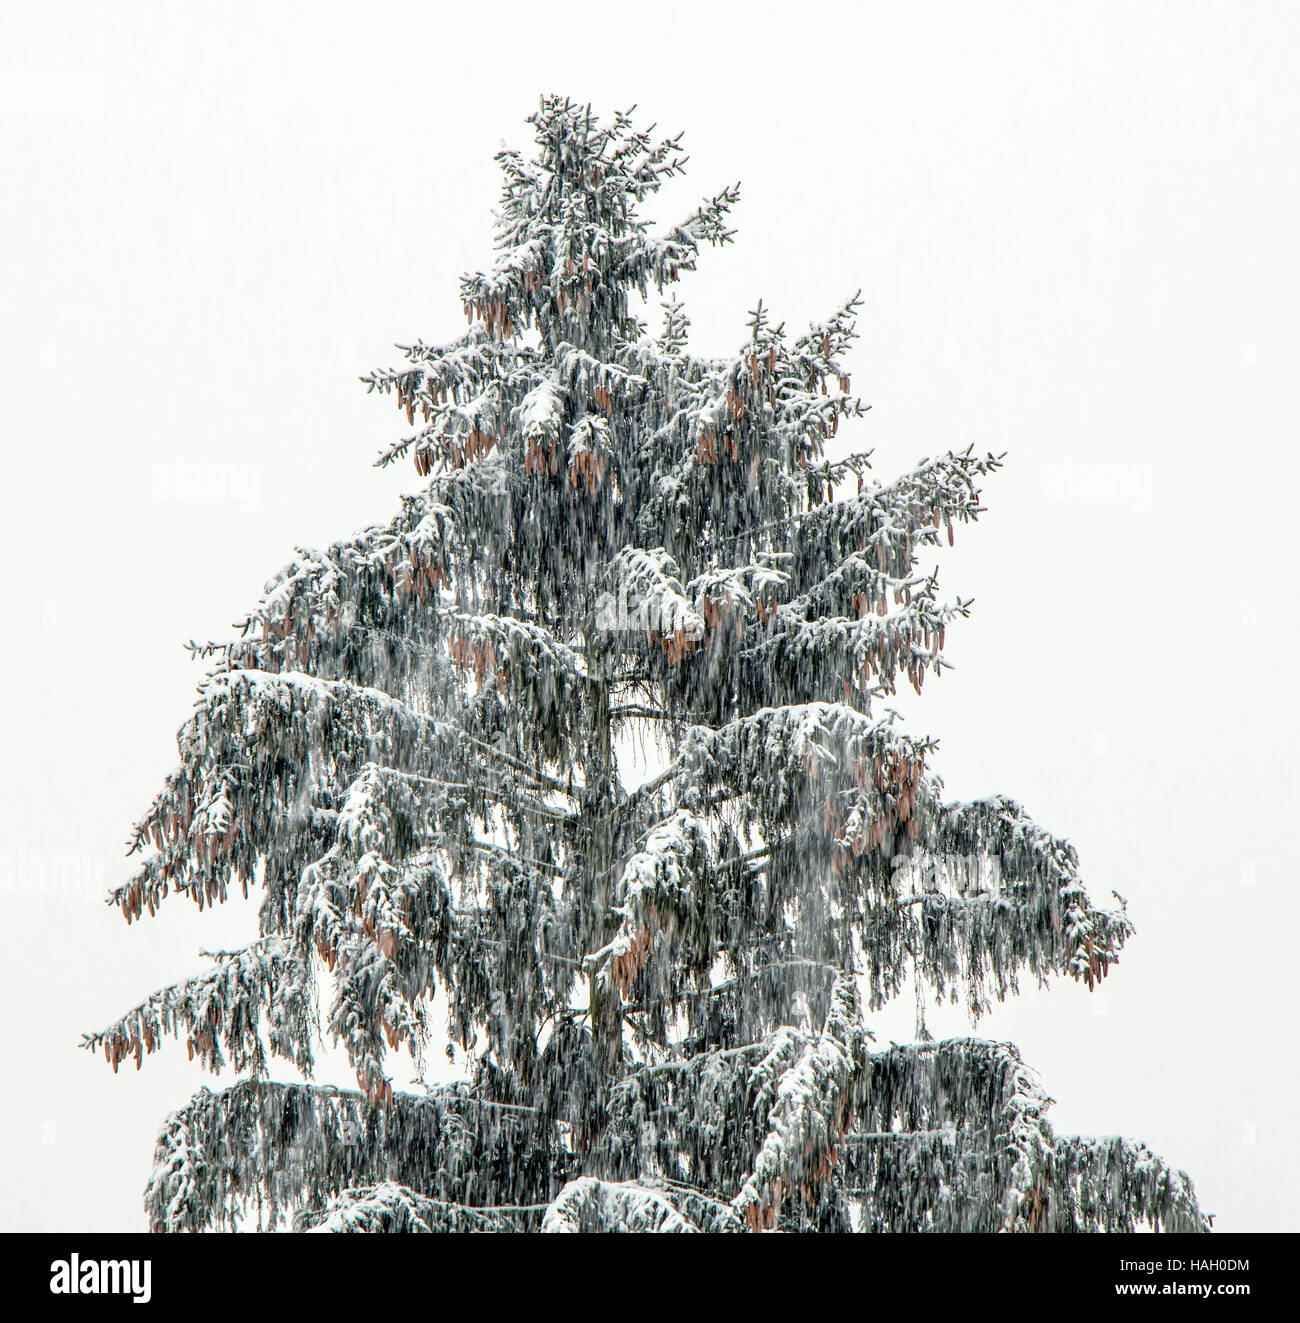 Heavy snowfall in the winter forest. Blizzard around spruce with cones. Snow falls on evergreen tree. Stock Photo